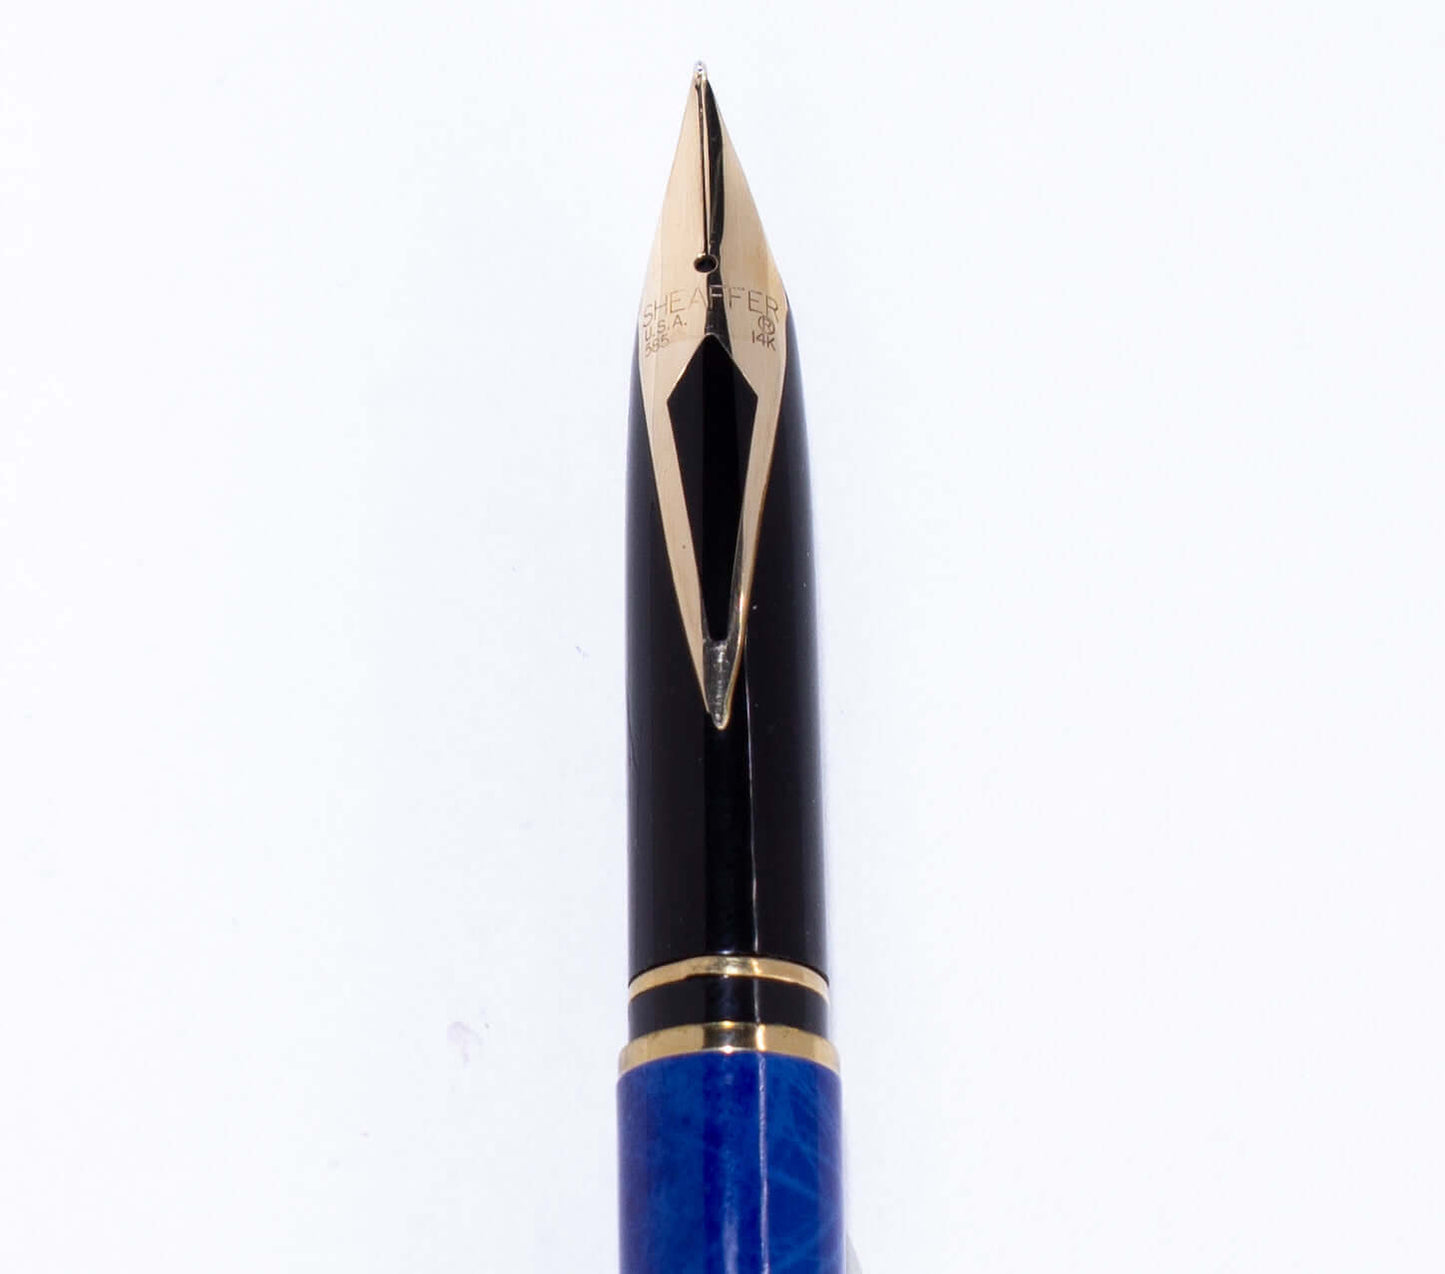 ${titleName/Type: Sheaffer Slim Targa Manufacture Year: 1980s Length: 5 3/8 Filling System: It takes Slim Sheaffer-style cartridges or converters. The original squeeze converter is included. Color/Pattern: Blue Ronce Lacquer Finish. 23K electroplate trim